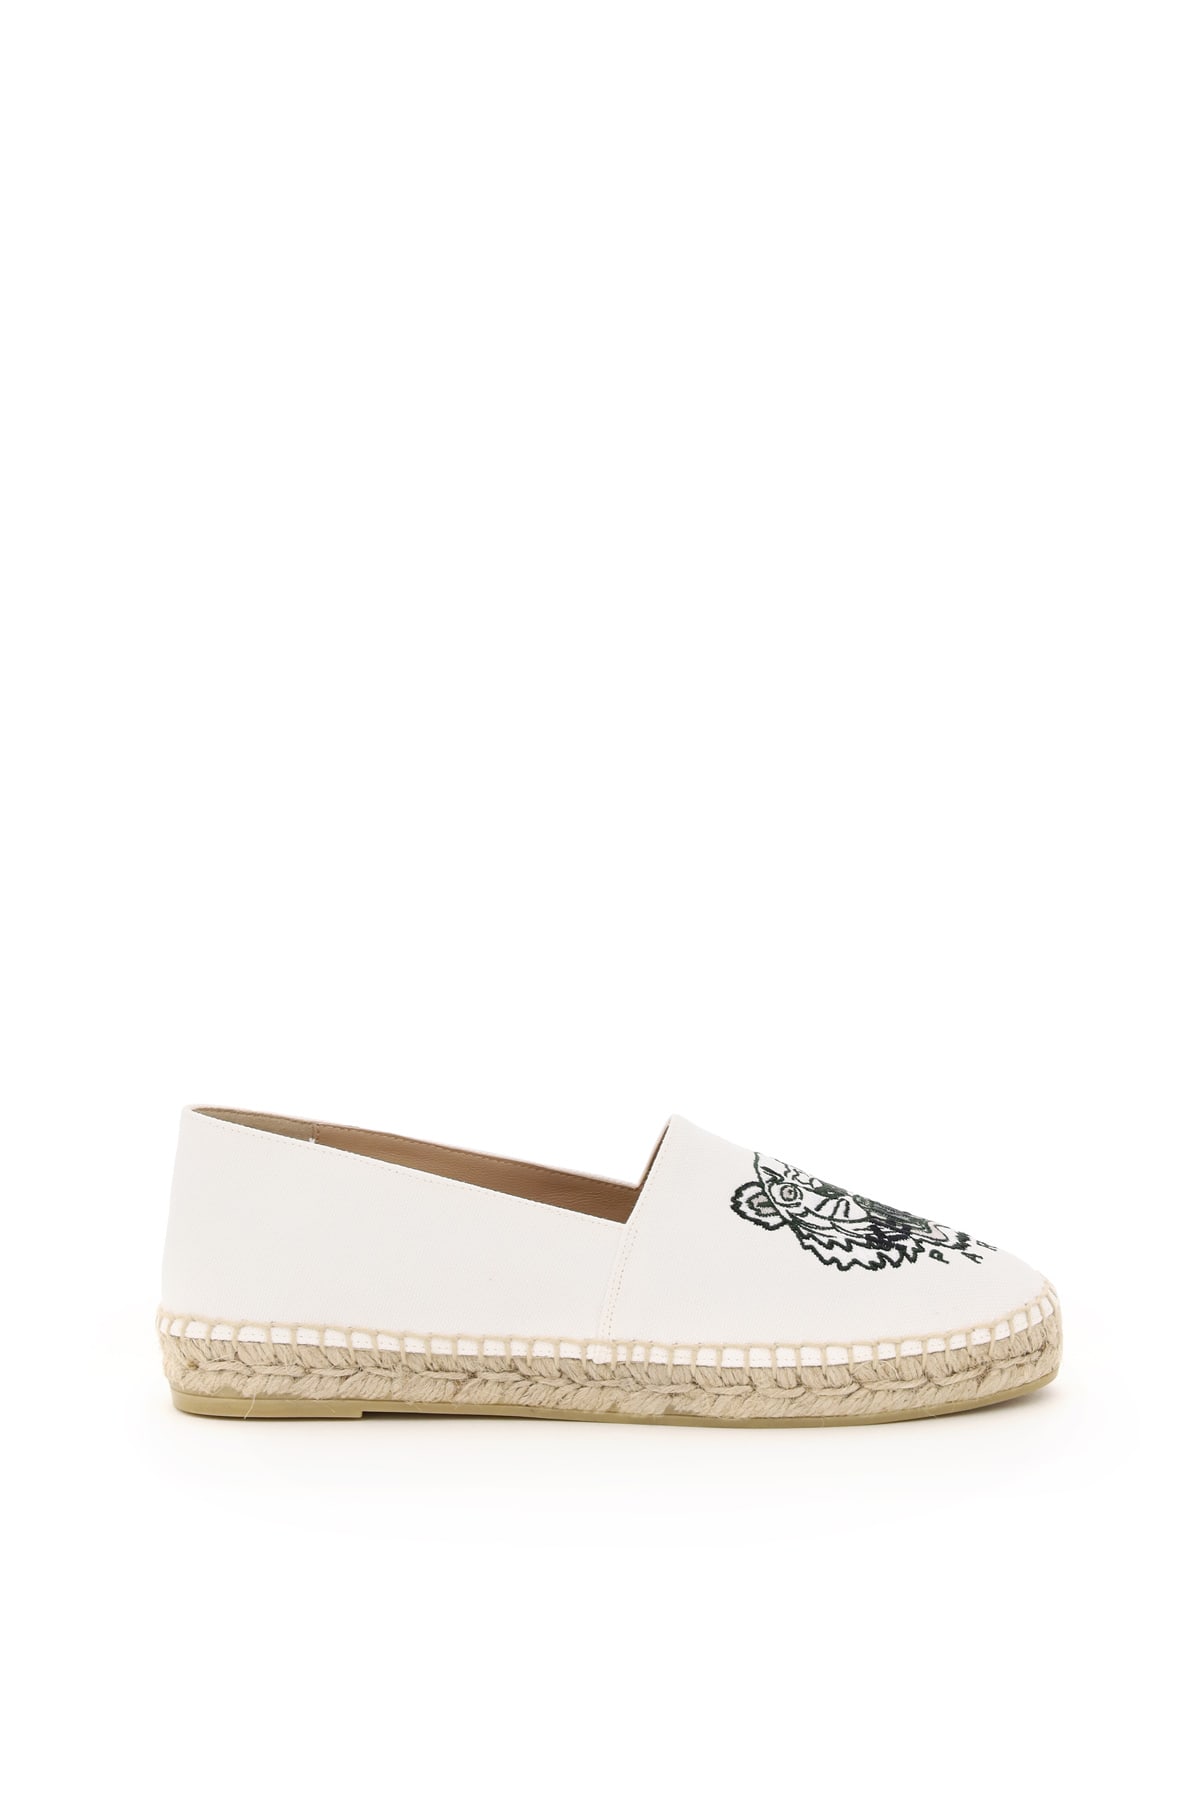 Buy Kenzo Classic Tiger Espadrilles online, shop Kenzo shoes with free shipping